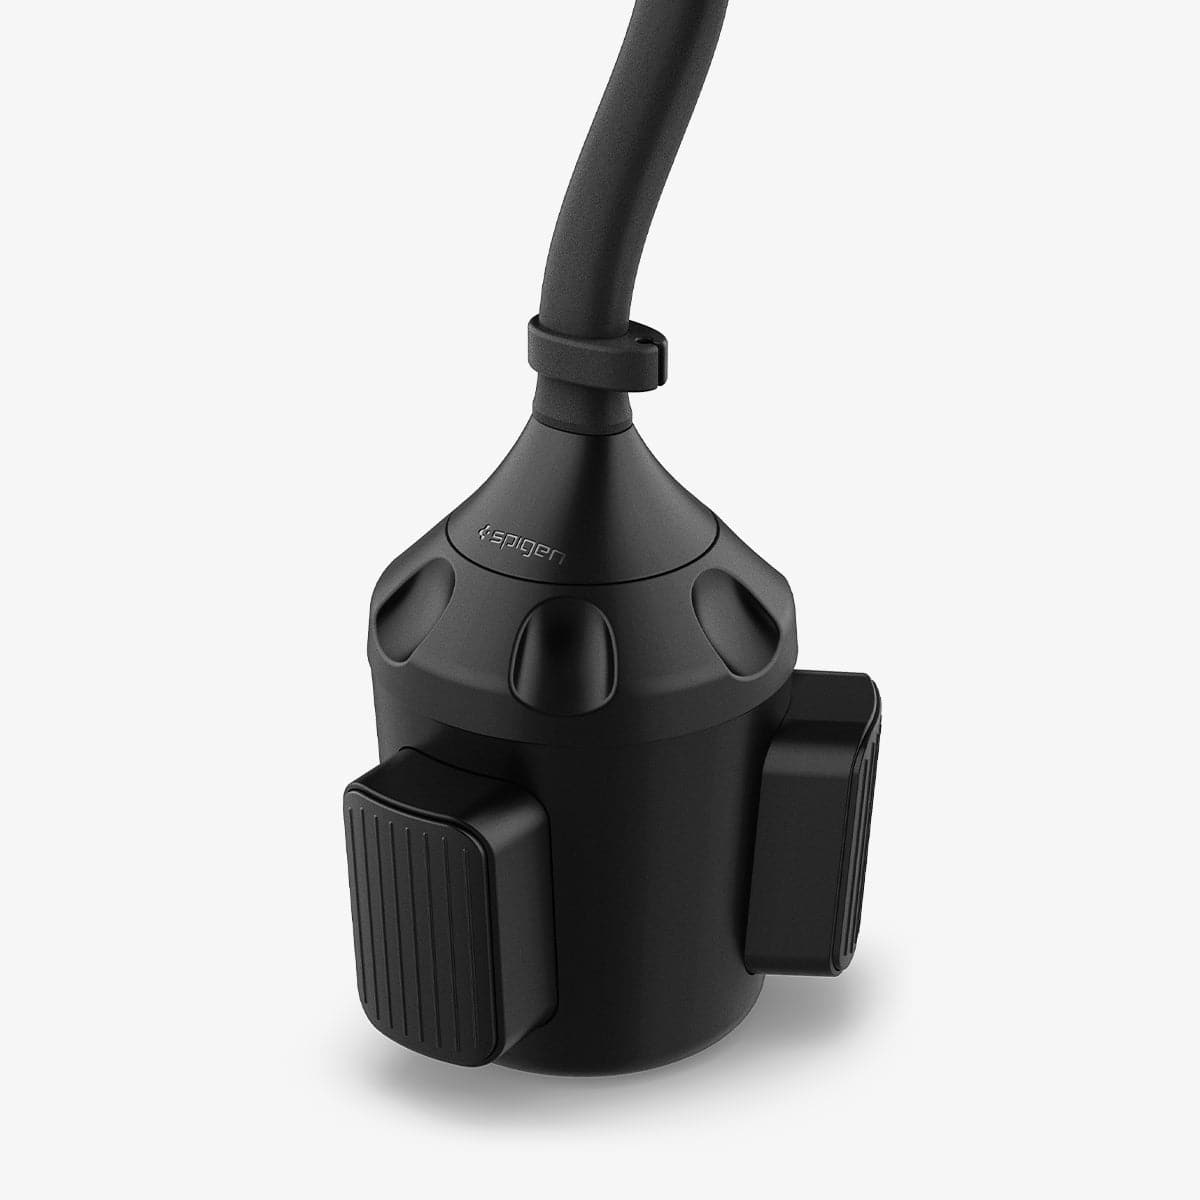 ACP03809 - OneTap Car Mount Cup Holder (MagFit) in black showing the bottom cup holder portion